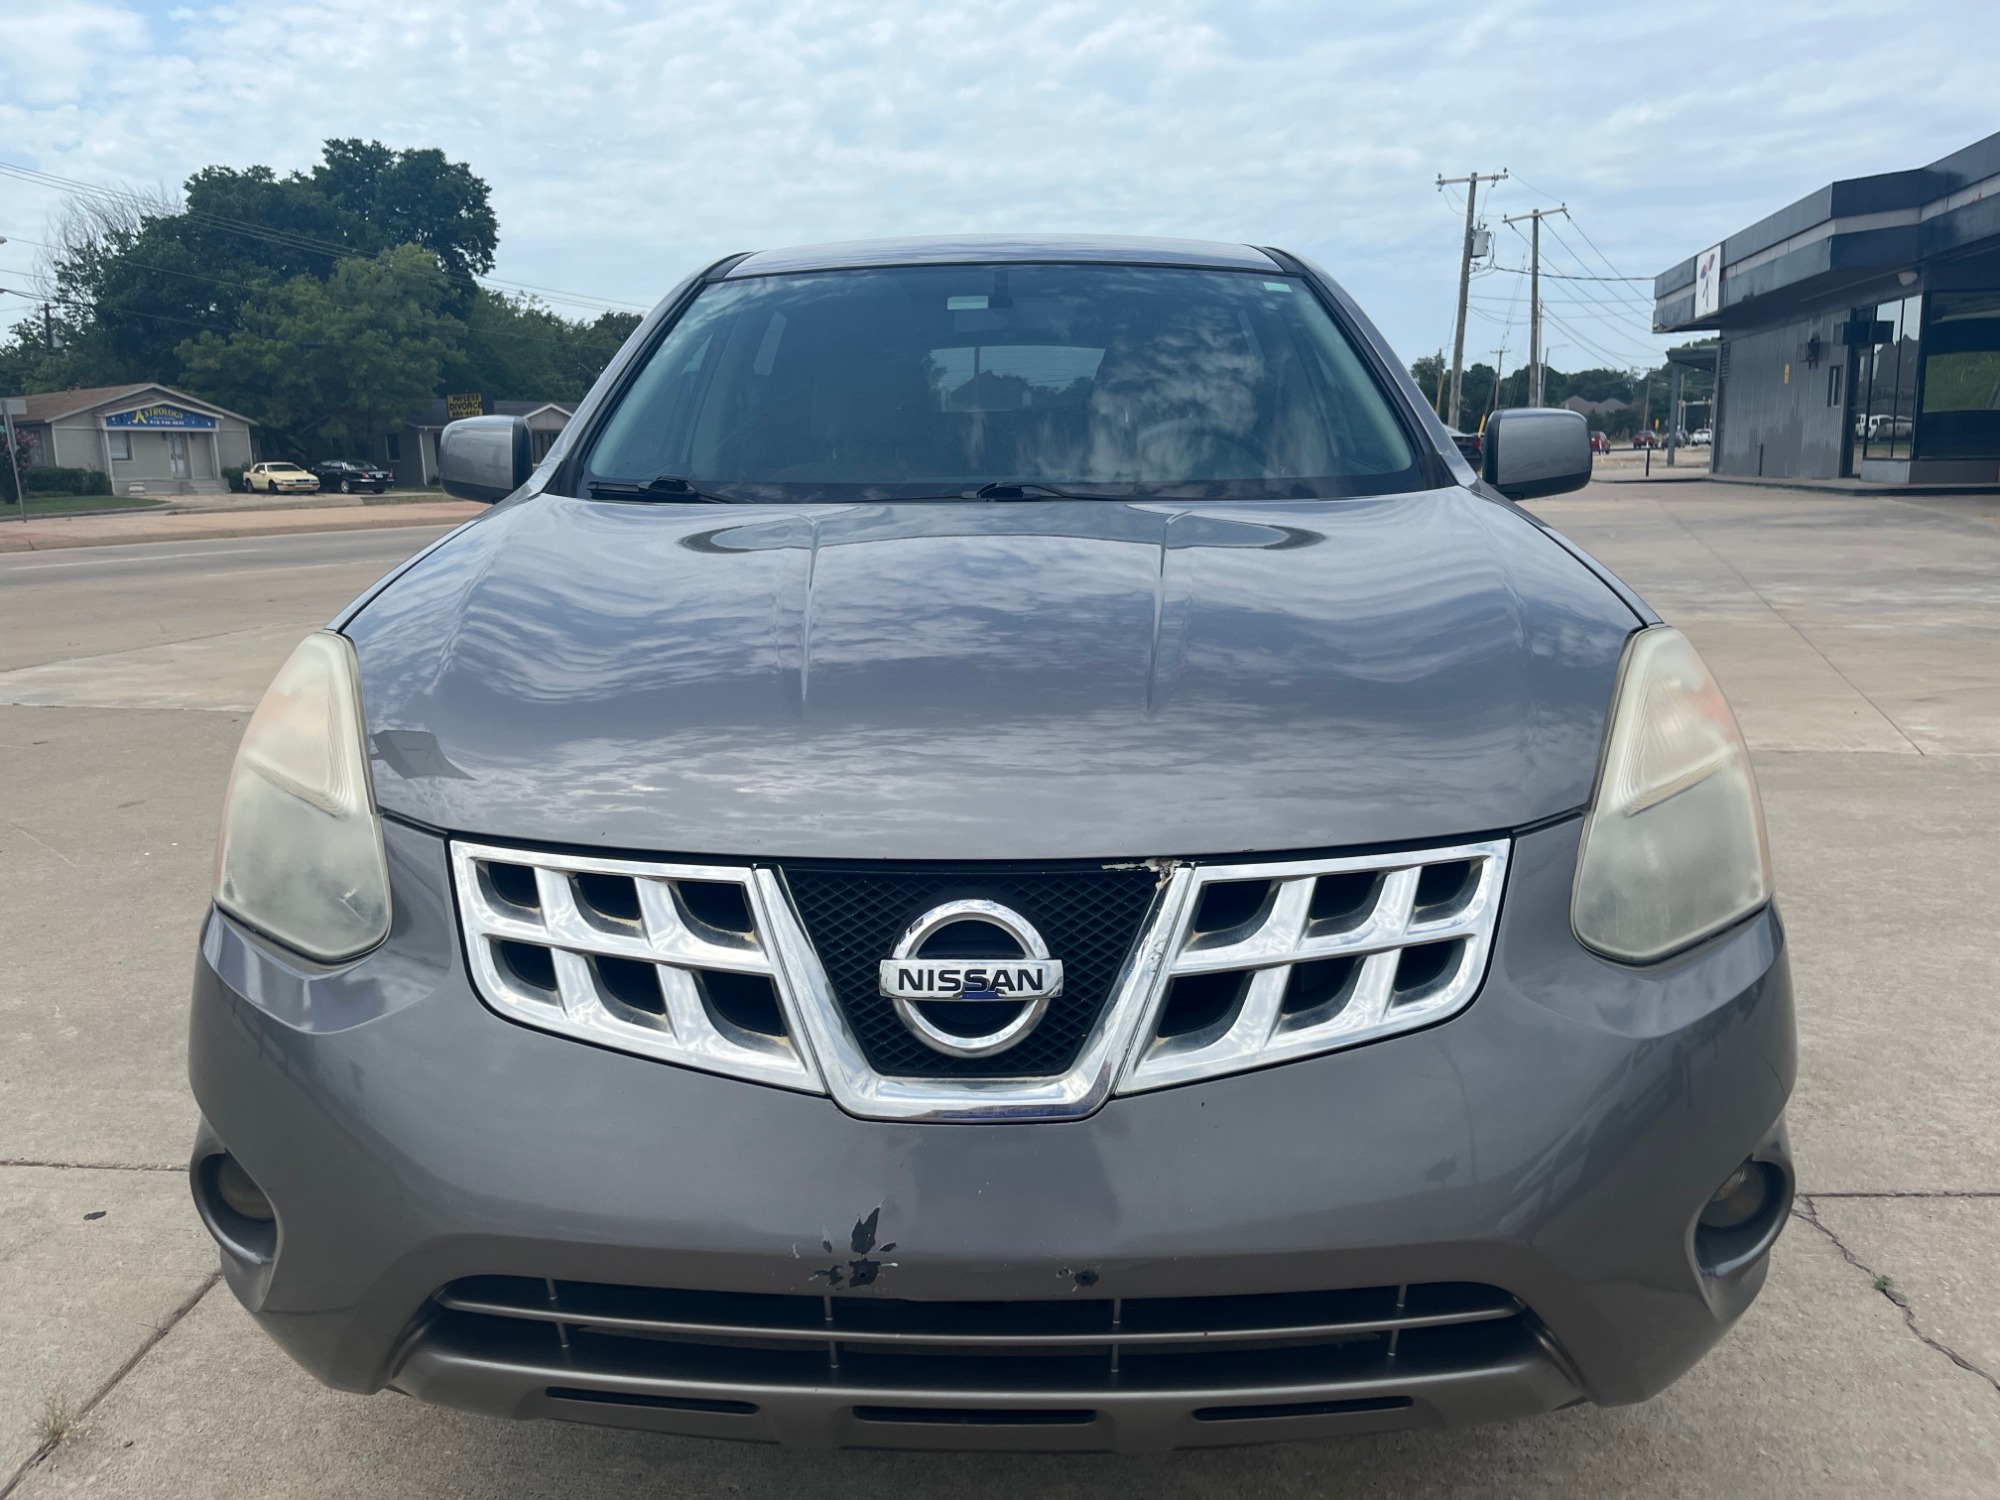 2013 Nissan Rogue S 2WD